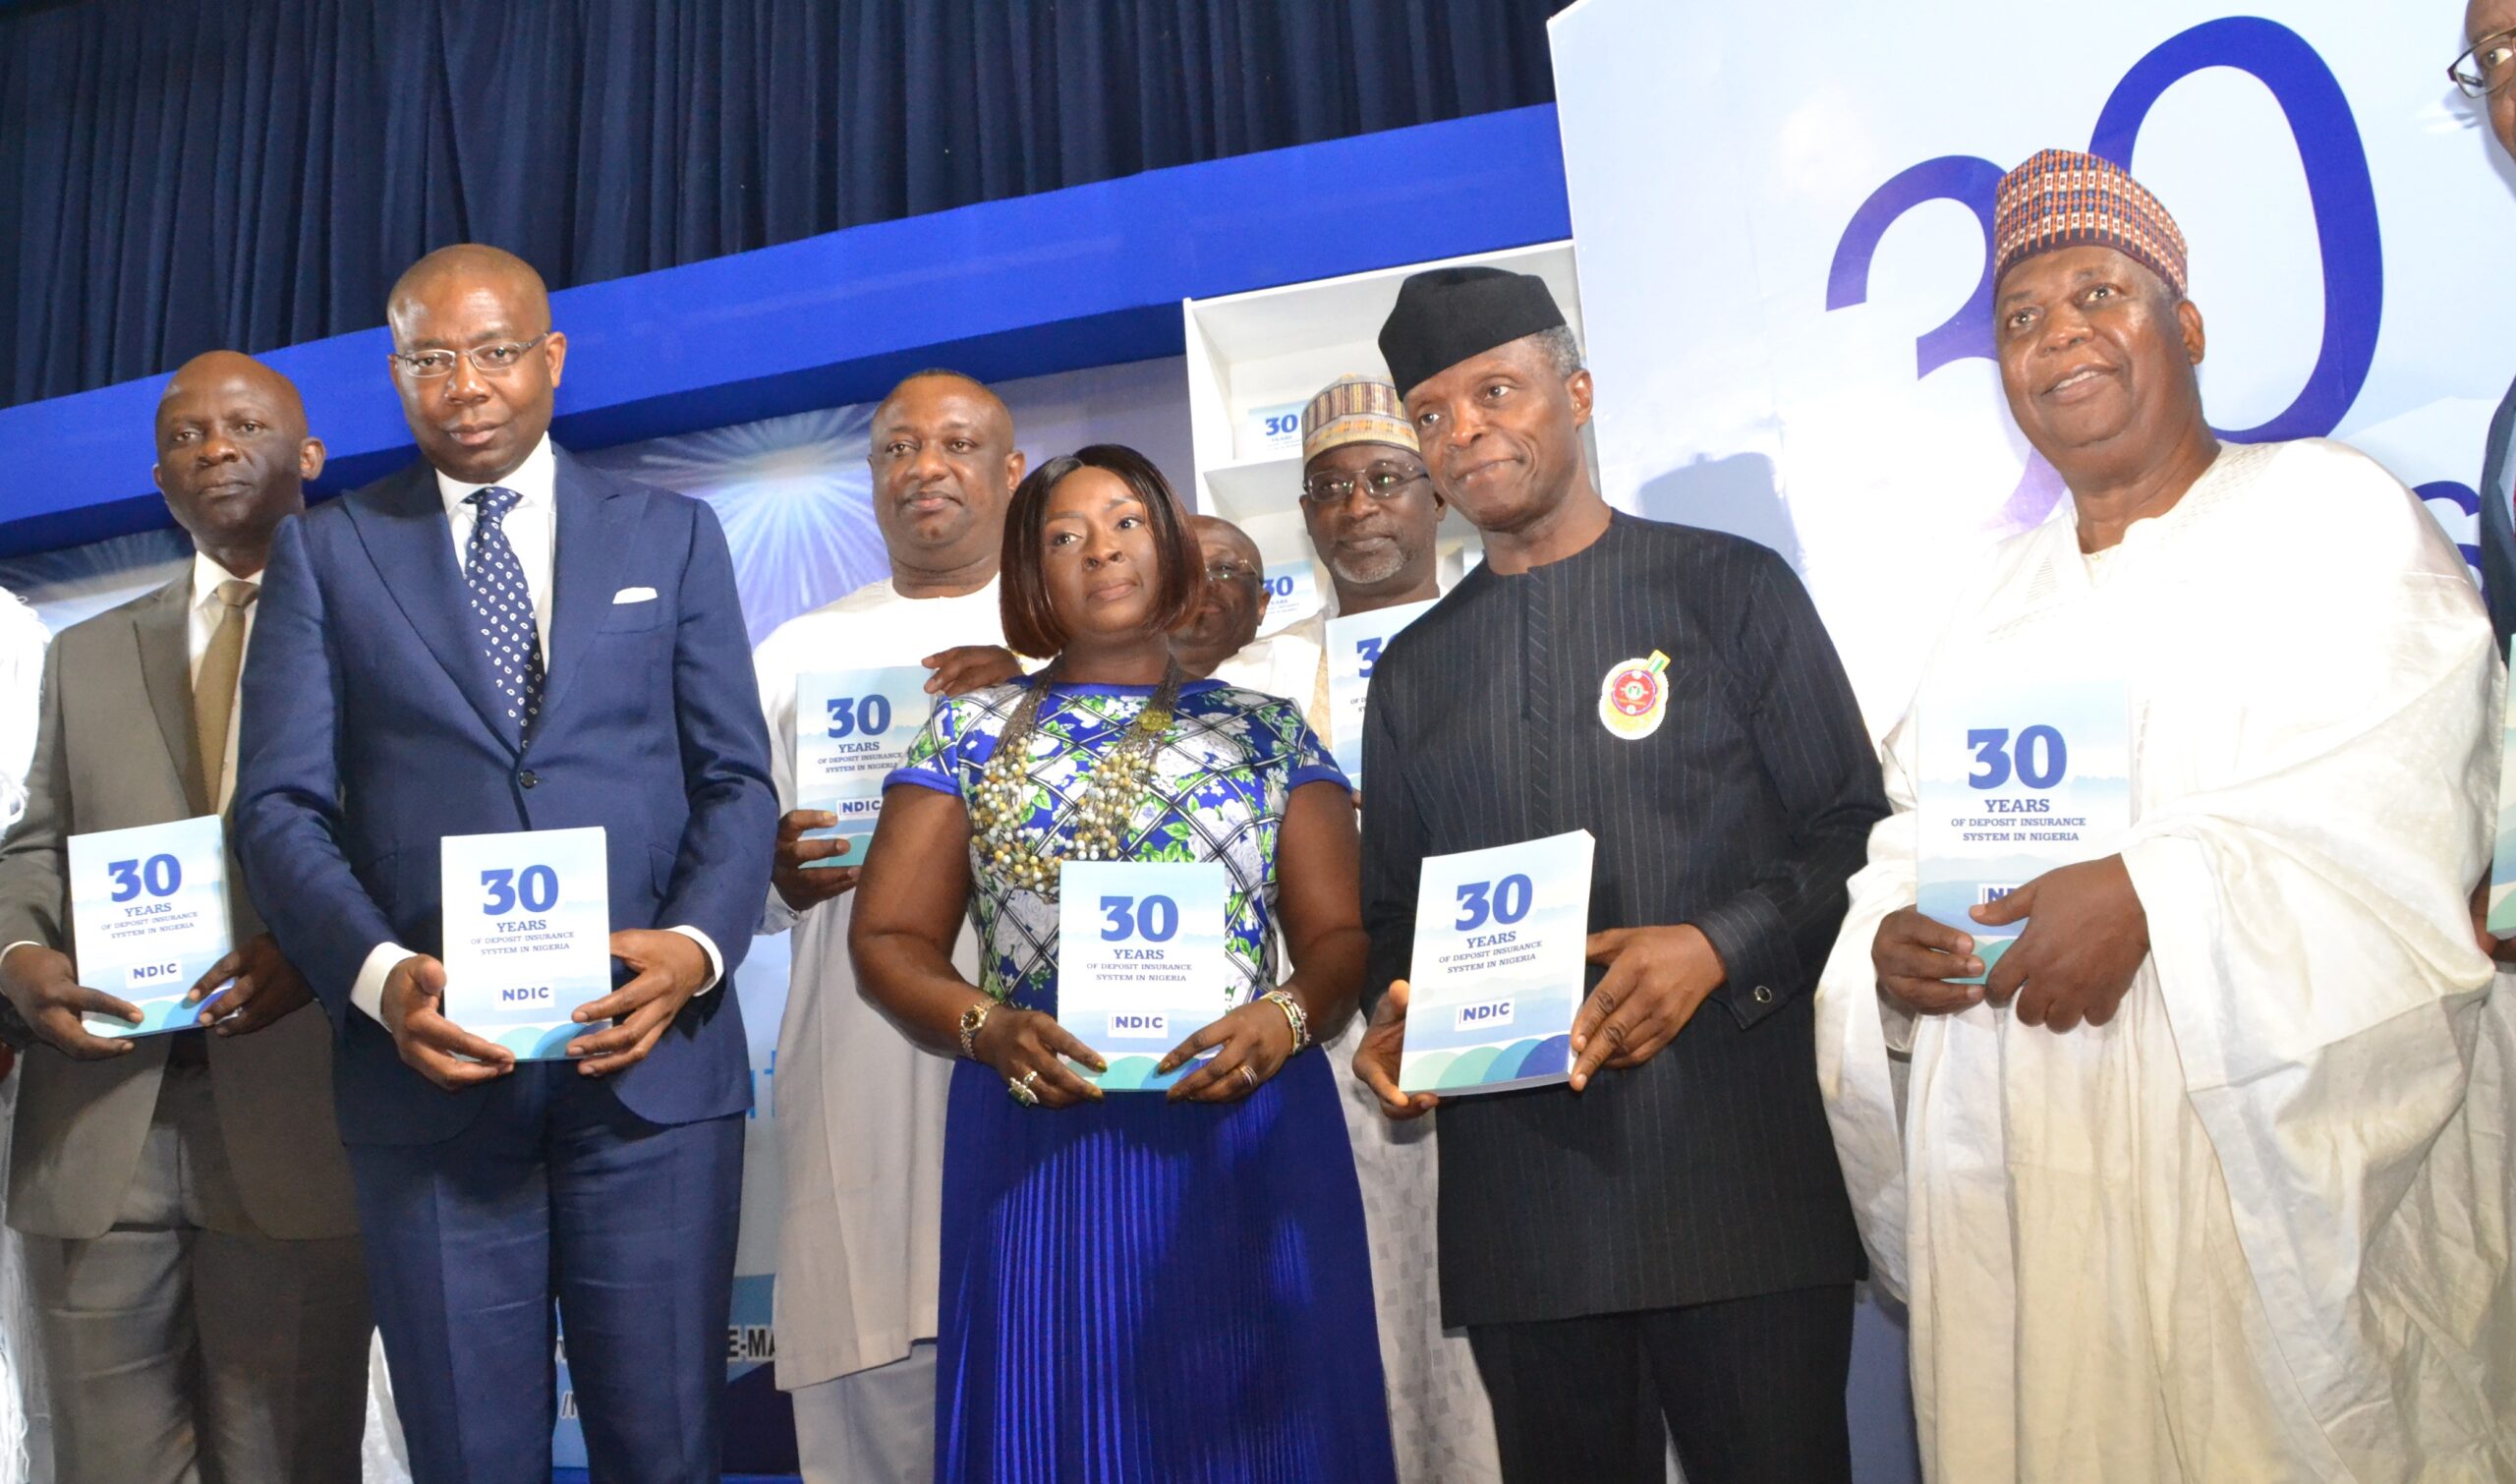 PICTURES AND CAPTIONS FROM NDIC 30th Anniversary Lecture & Book Presentation